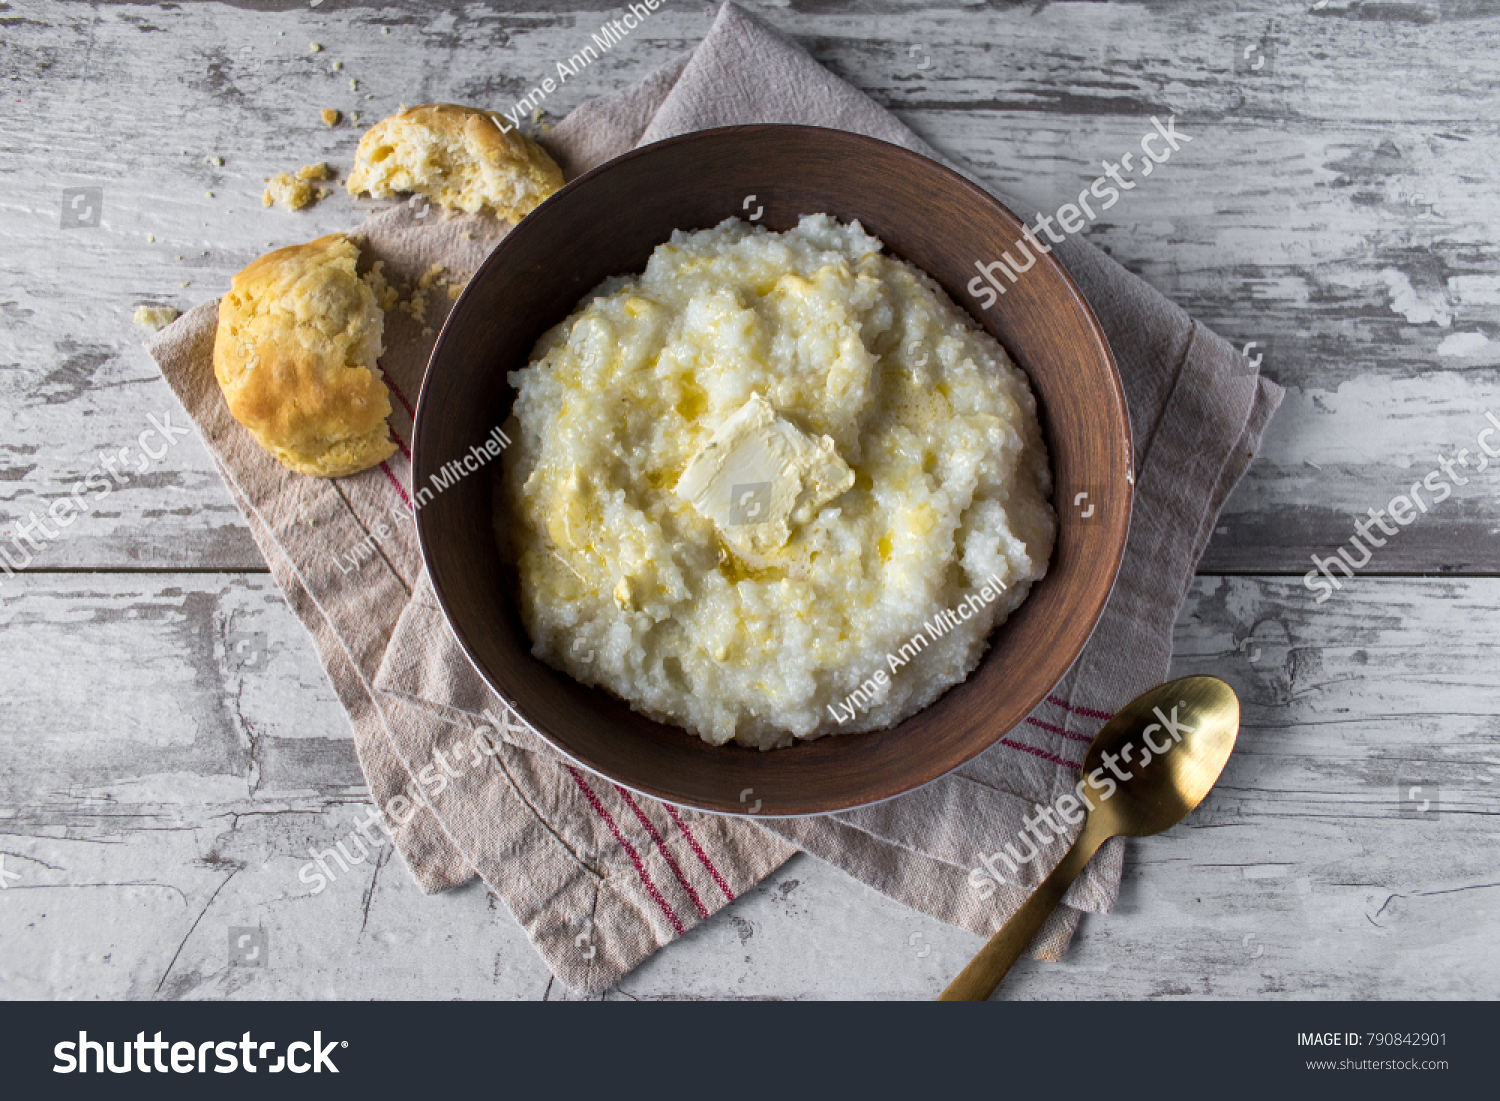 buttered grits with biscuits in rustic setting top view #790842901